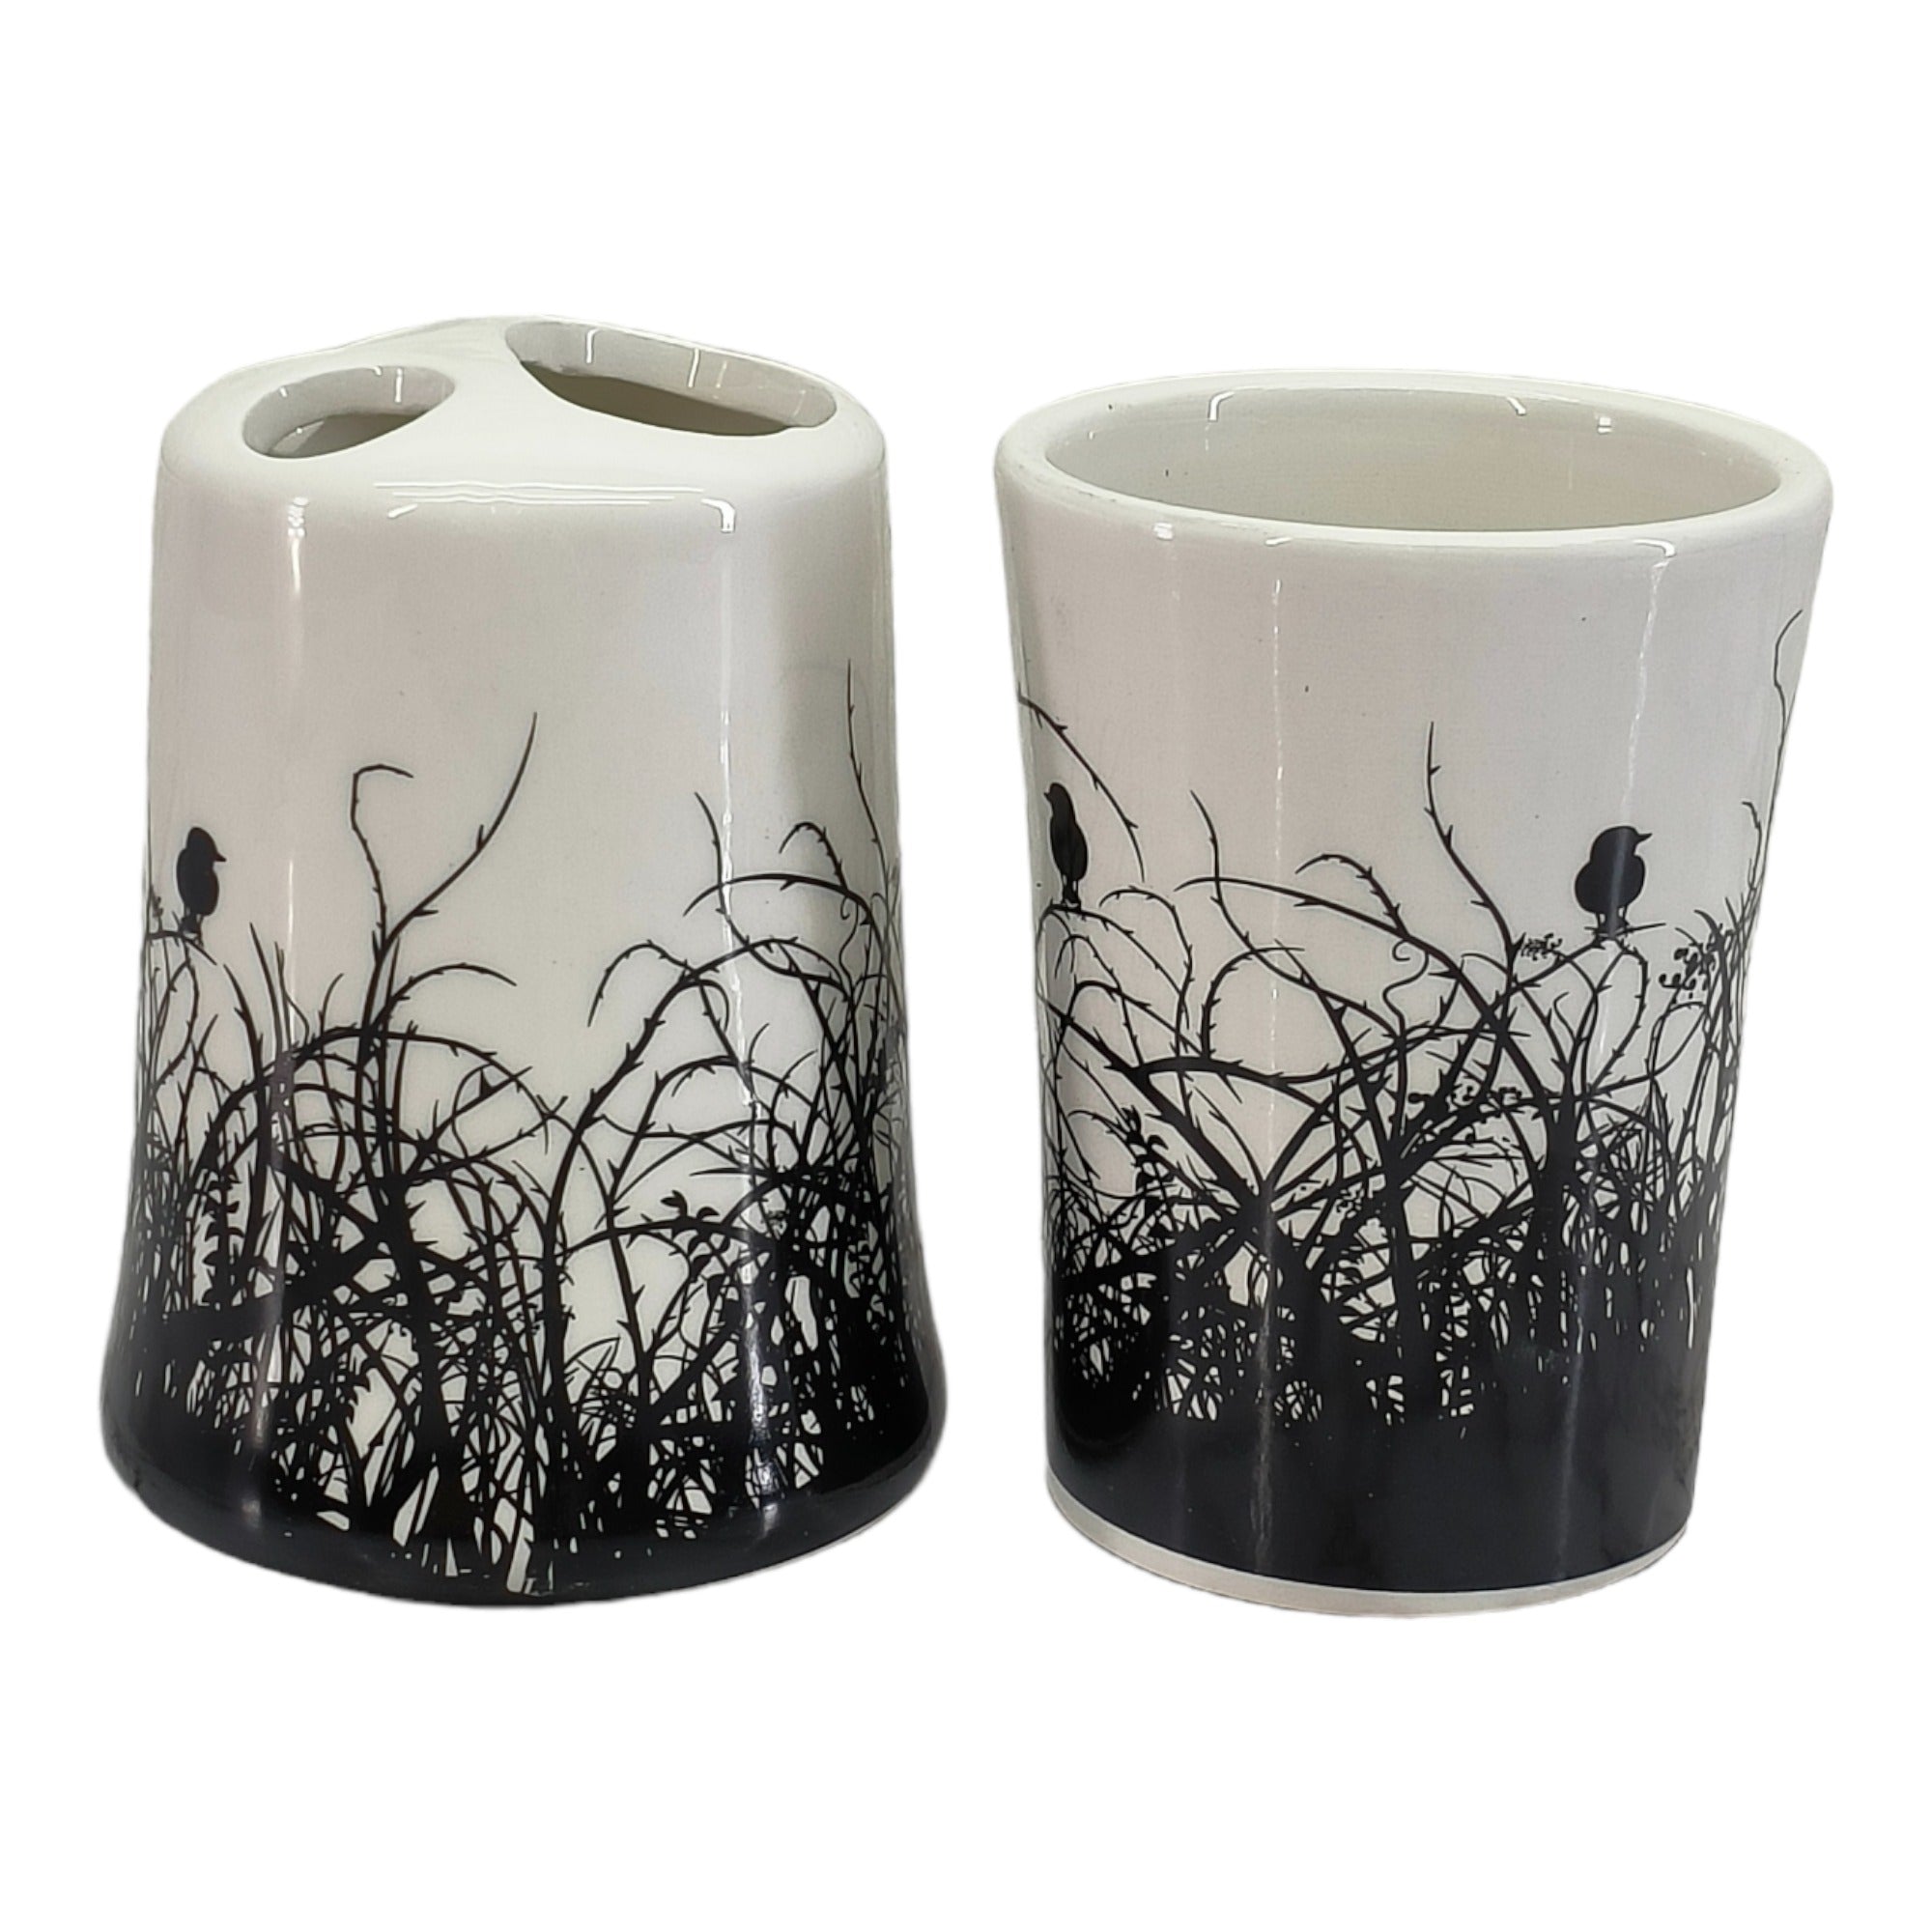 Ceramic Tumbler with Toothbrush Holder, Set of 2 Bathroom Accessories for Home (C2100)